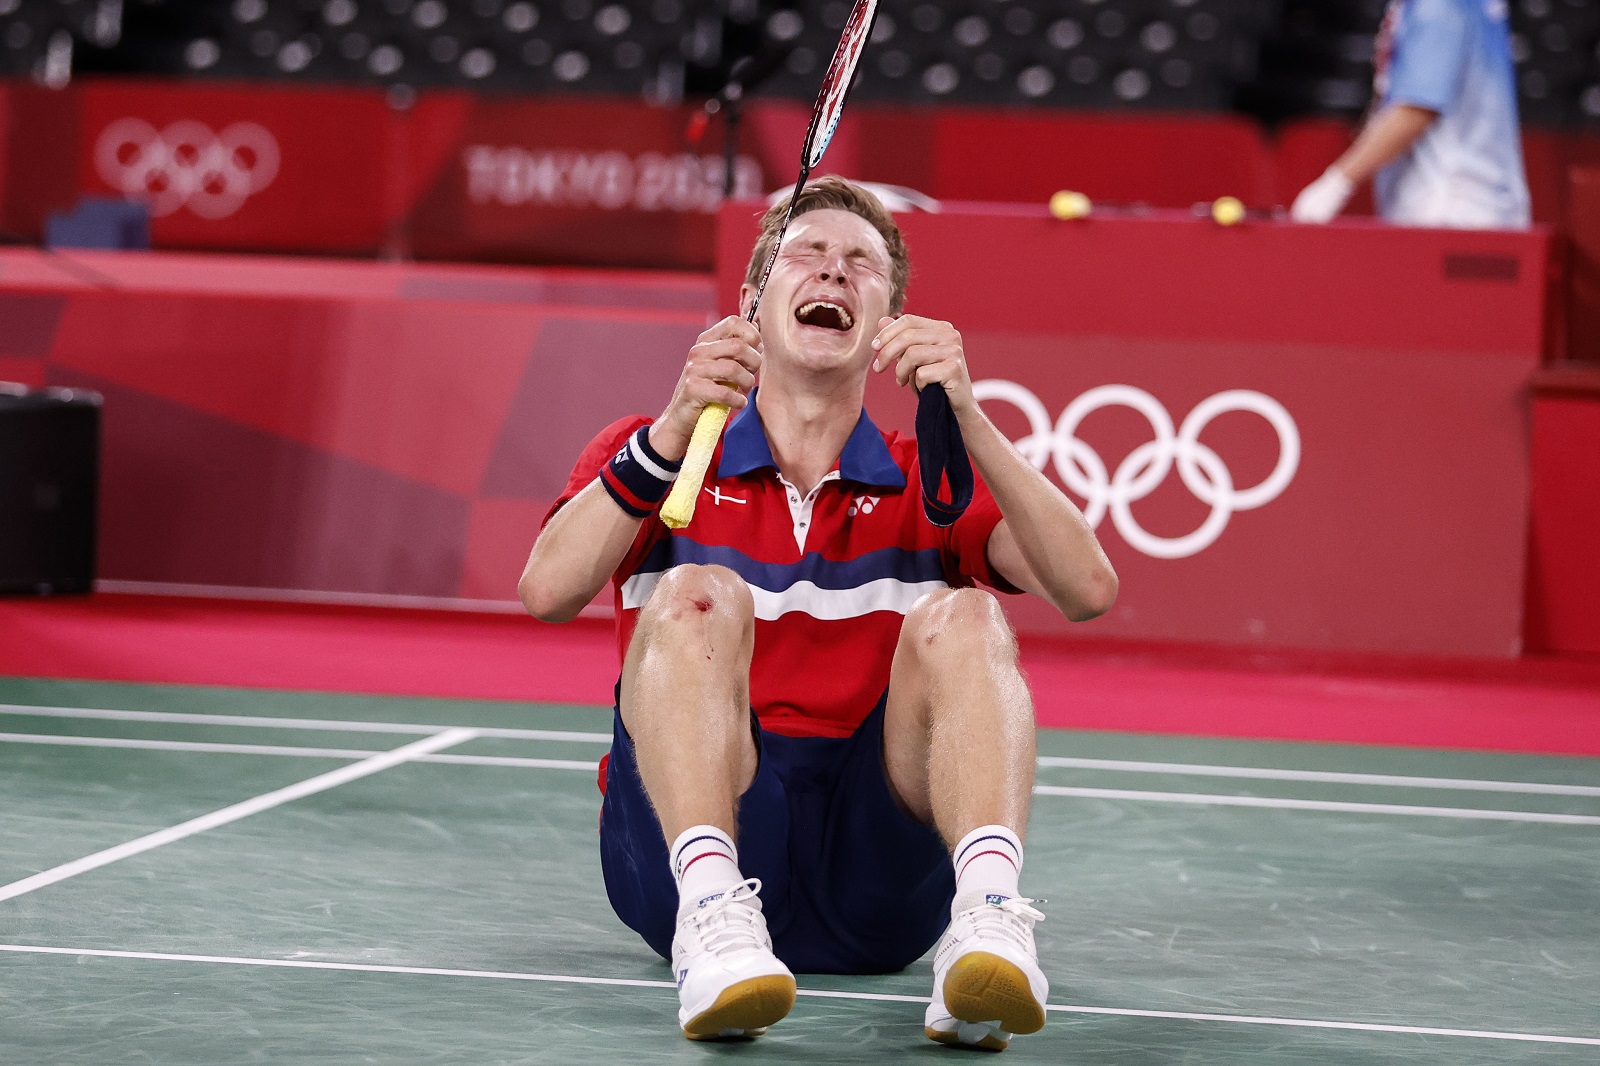 epa09388247 Viktor Axelsen of Denmark celebrates after winning his Men’s Singles gold medal match against Chen Long of China at the Badminton events of the Tokyo 2020 Olympic Games at the Musashino Forest Sport Plaza in Chofu, Tokyo, Japan, 02 August 2021.  EPA/MAST IRHAM